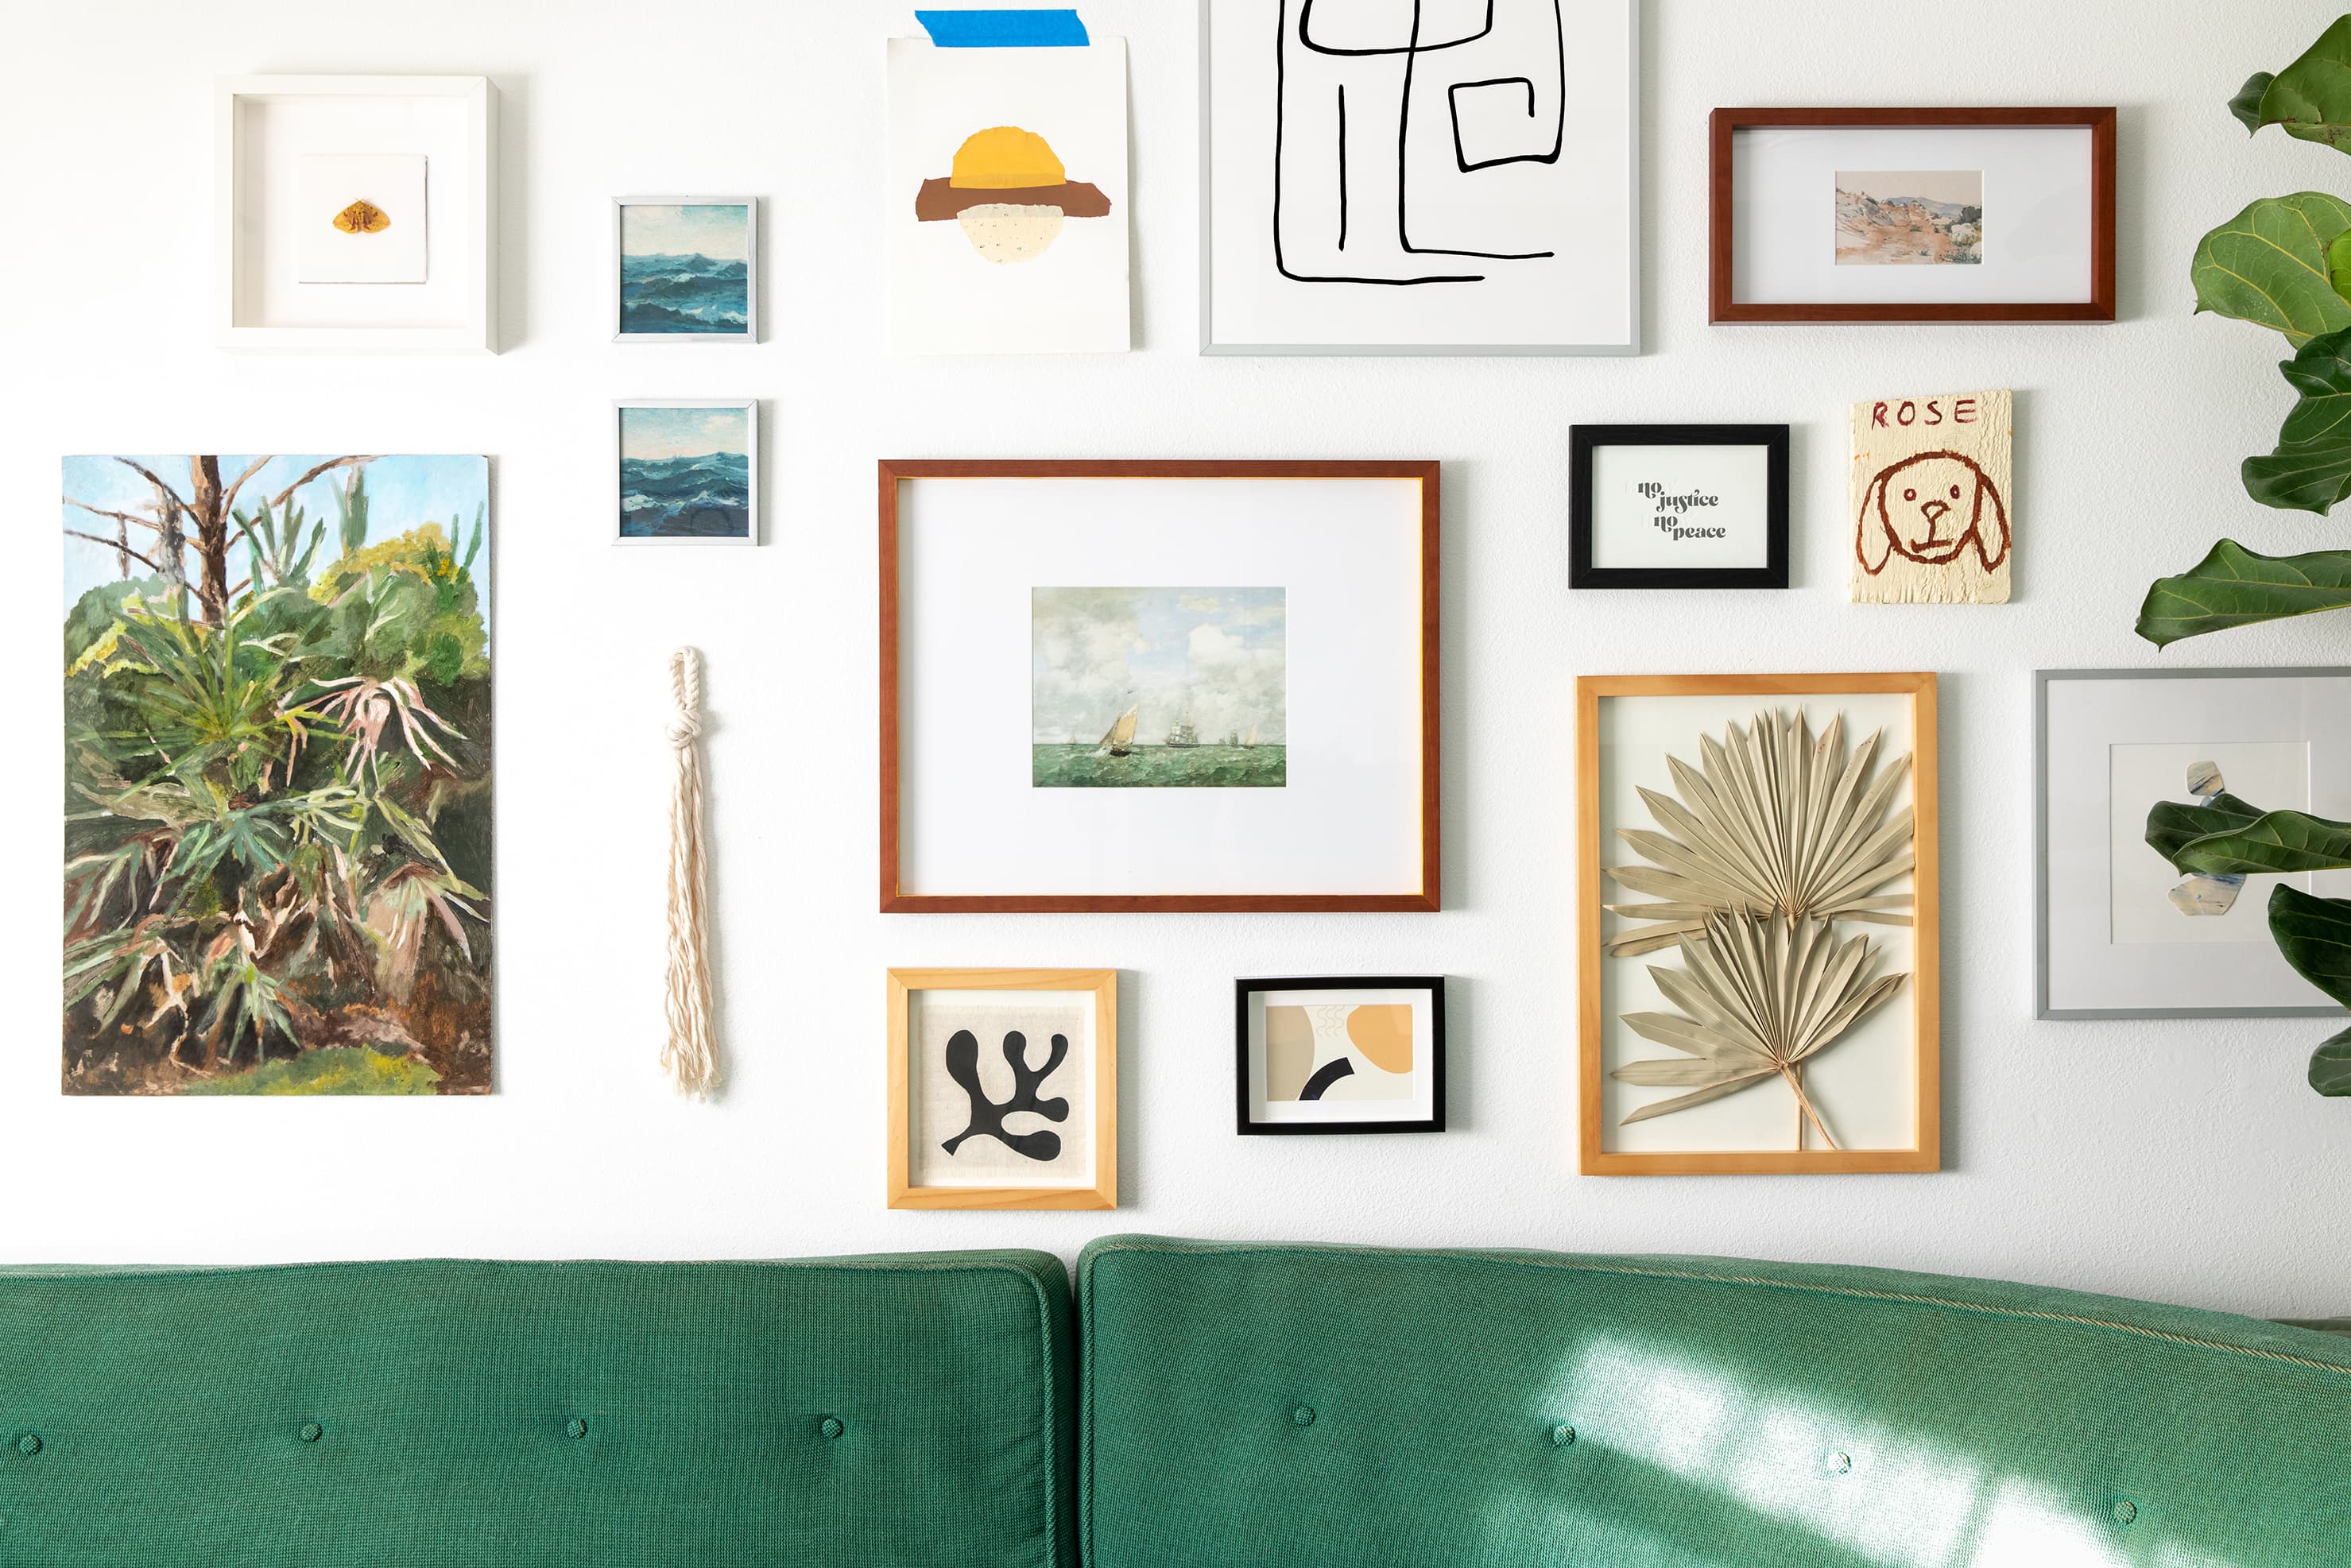 How To Frame Small Art (Art Smaller Than 5 X 5)